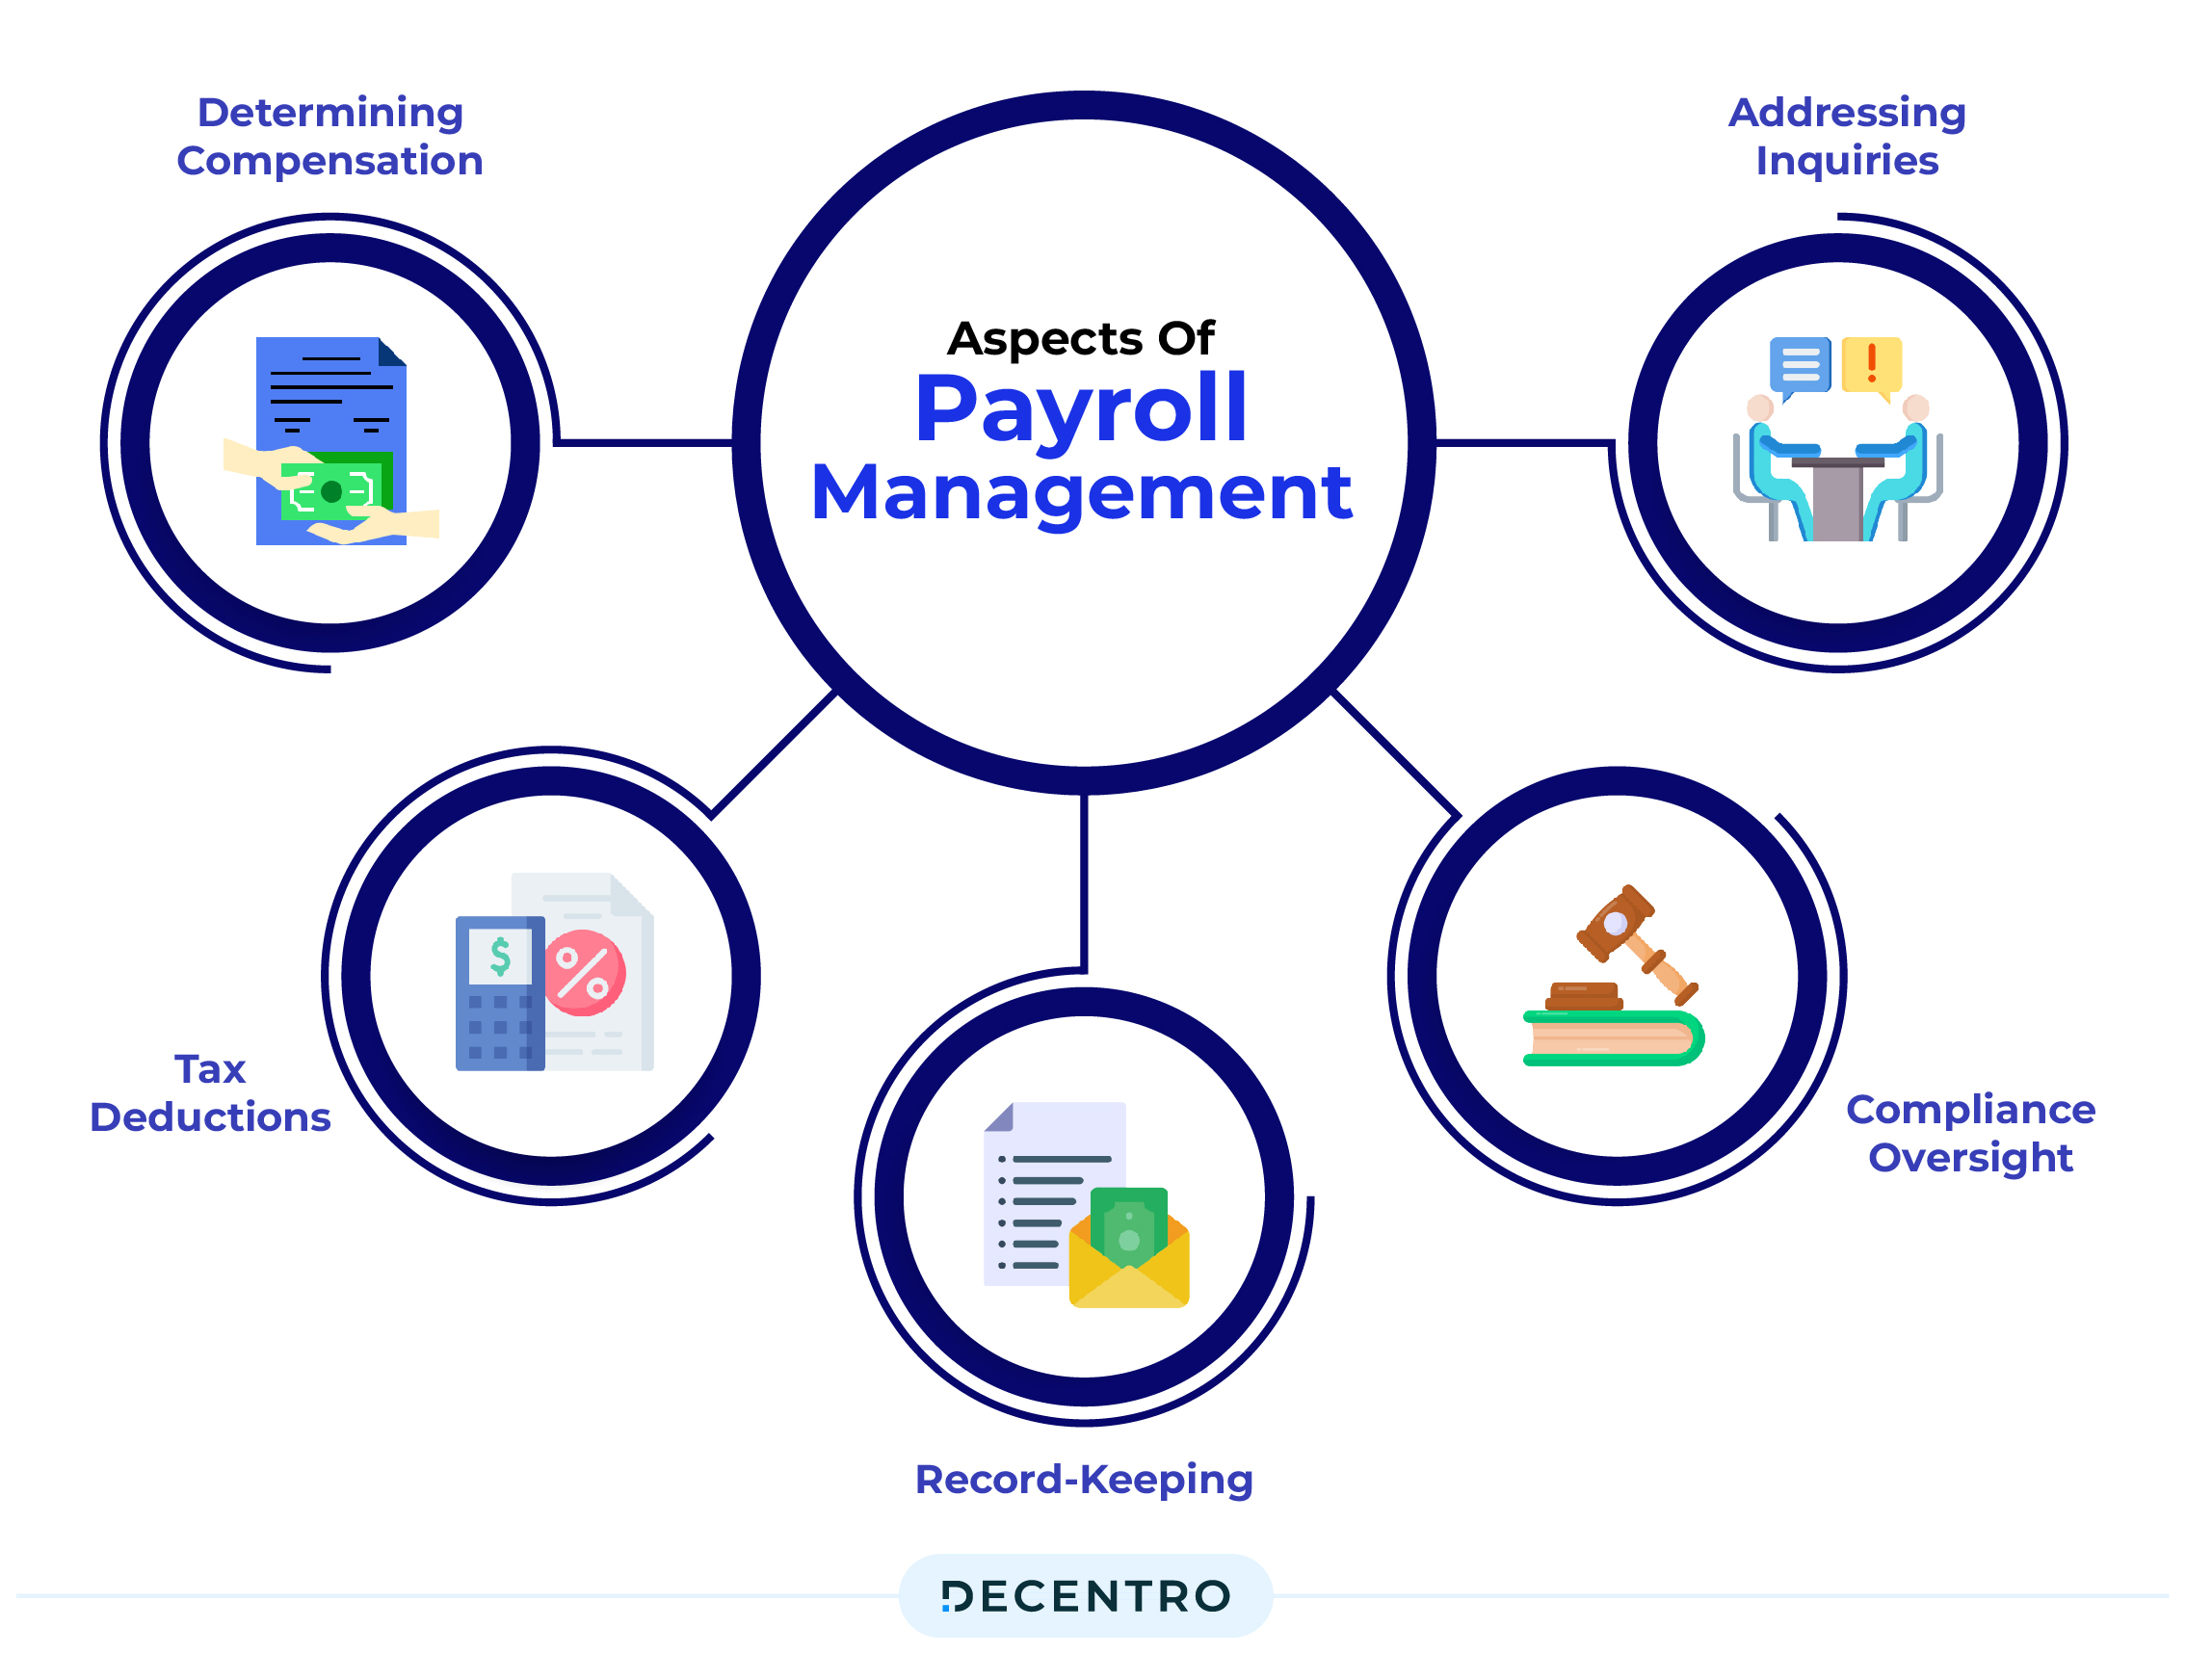 Aspects of payroll management